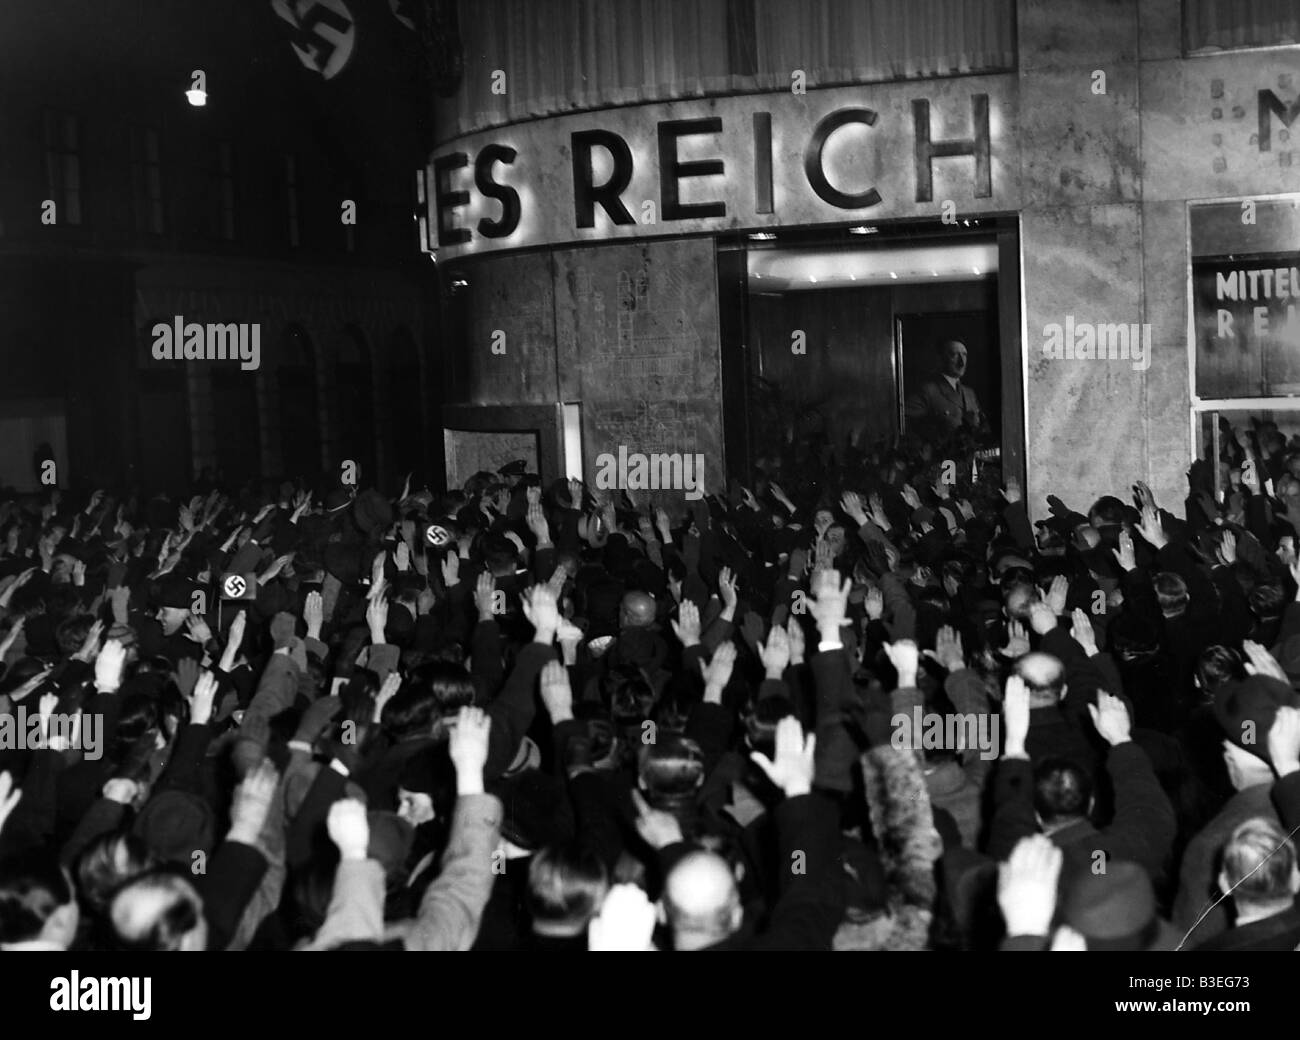 Nazism / National Socialism, politics, annexation of Austria 1938, Austrian Nazis in front of the German Traffic Office, Vienna, 12.3.1938, Nazi Germany, Third Reich, Anschluss, occupation, people, crowd, Hitler salute, 20th century, historic, historical, 1930s, Stock Photo